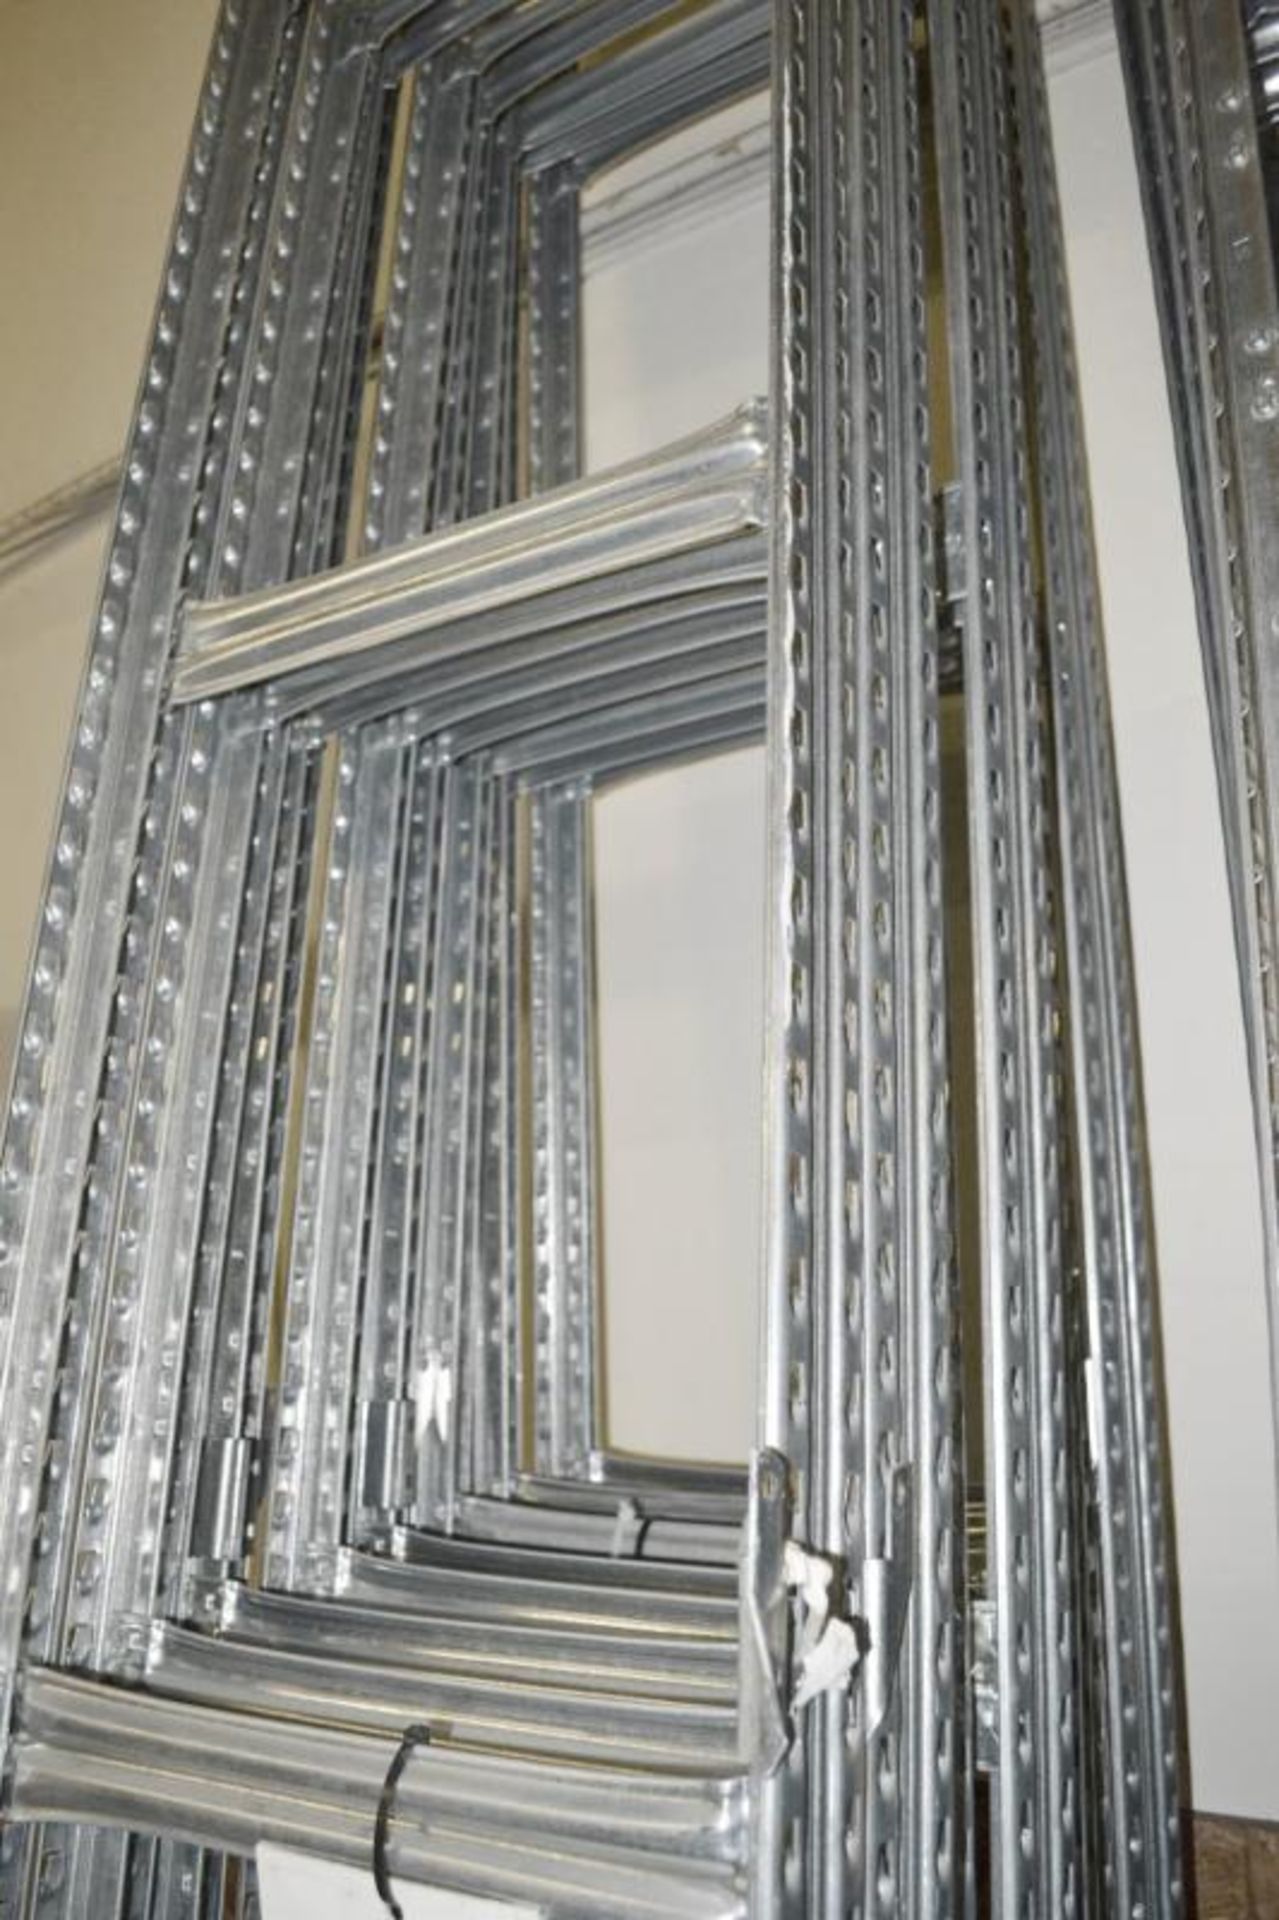 4 x Bays of Metalsistem Steel Modular Storage Shelving - Includes 65 Pieces - Recently Removed - Image 5 of 17